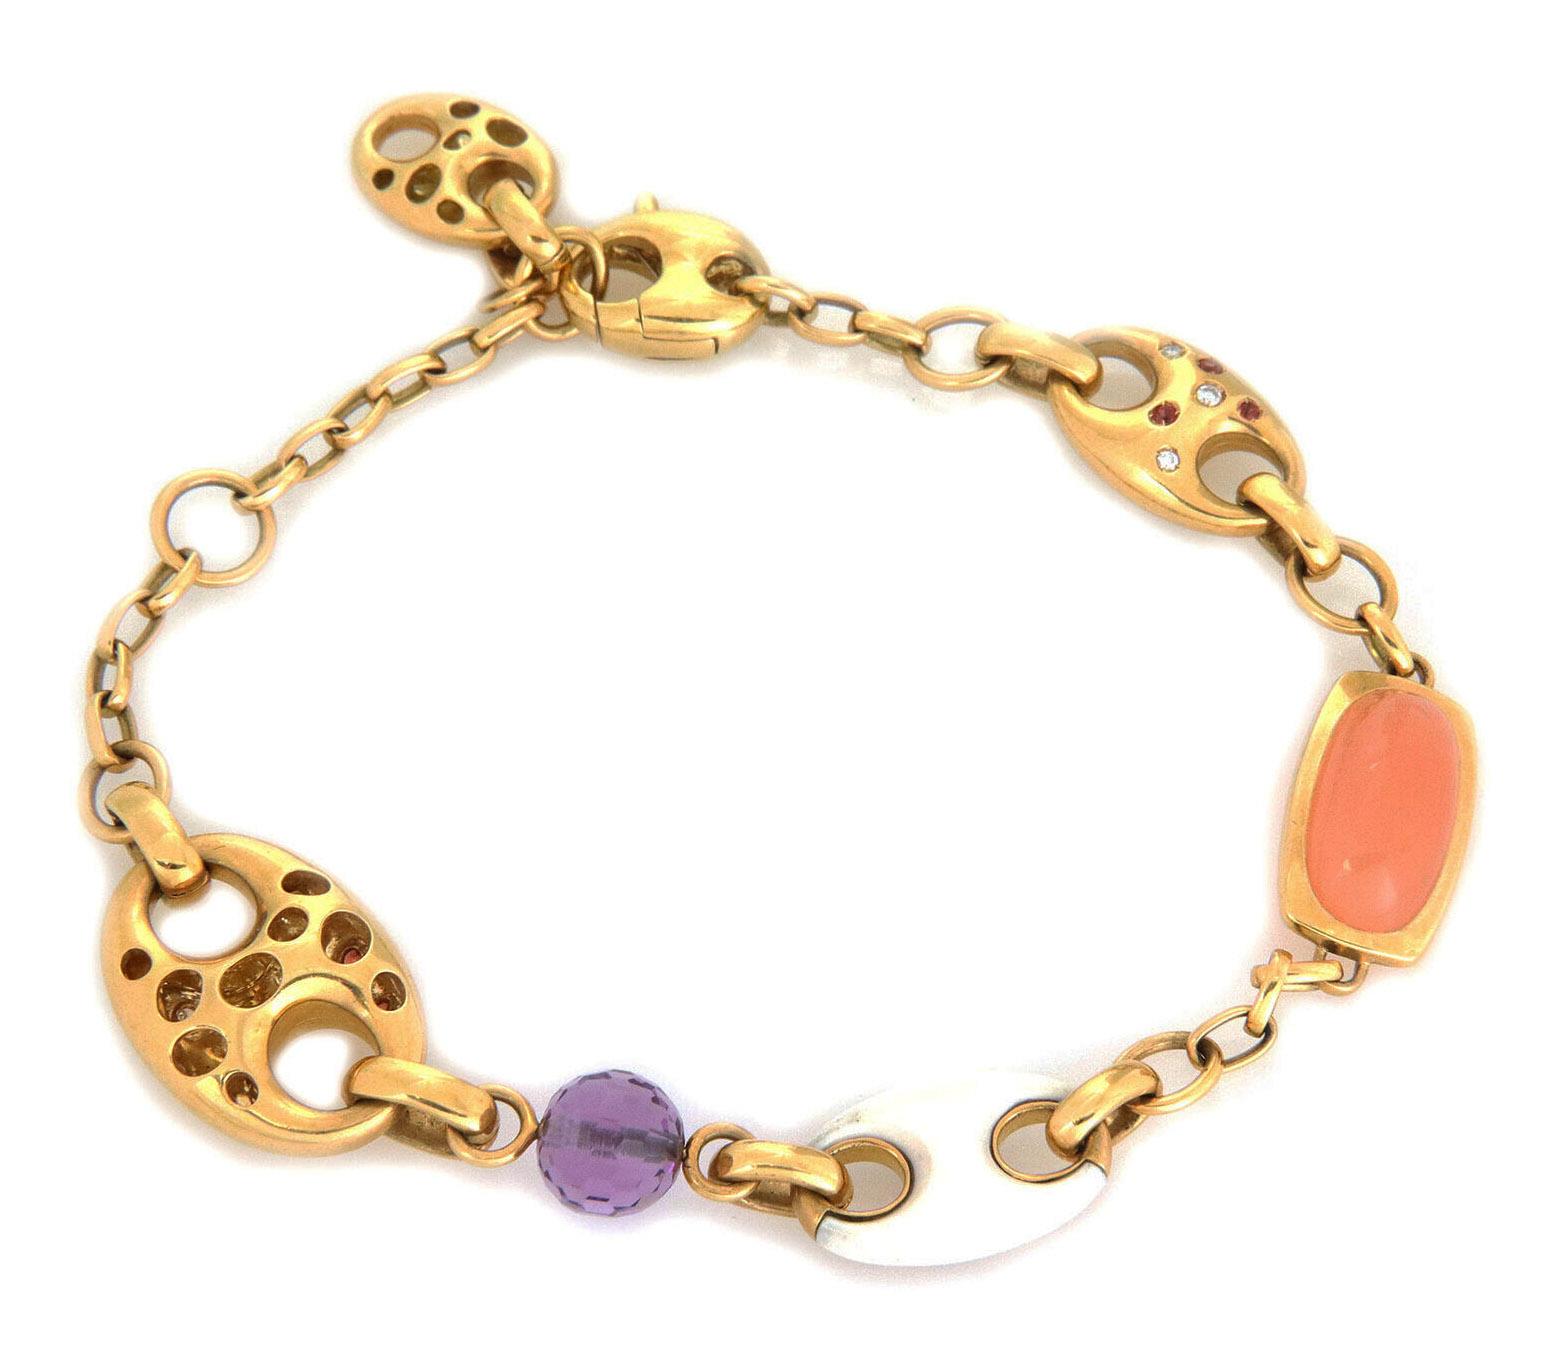 This elegant authentic bracelet is by designer Valente, it is crafted from 18k yellow gold with a polished finish featuring large and small mariner link motifs decorated with flush set citrine and diamonds with small oval chain links, one small